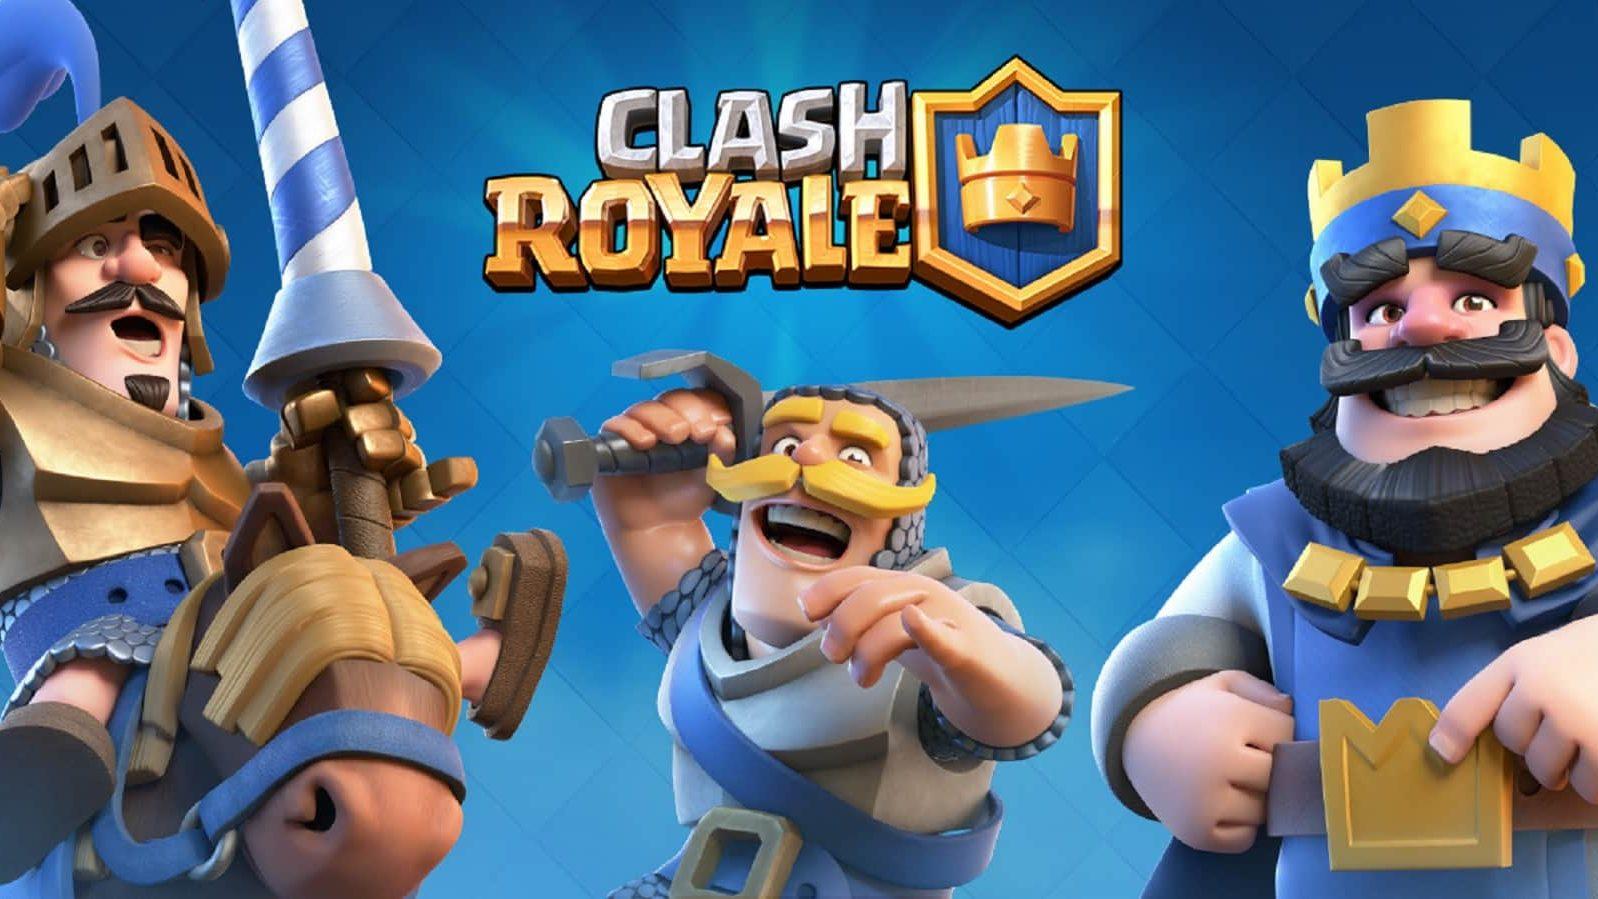 poster featuring characters from Clash Royale